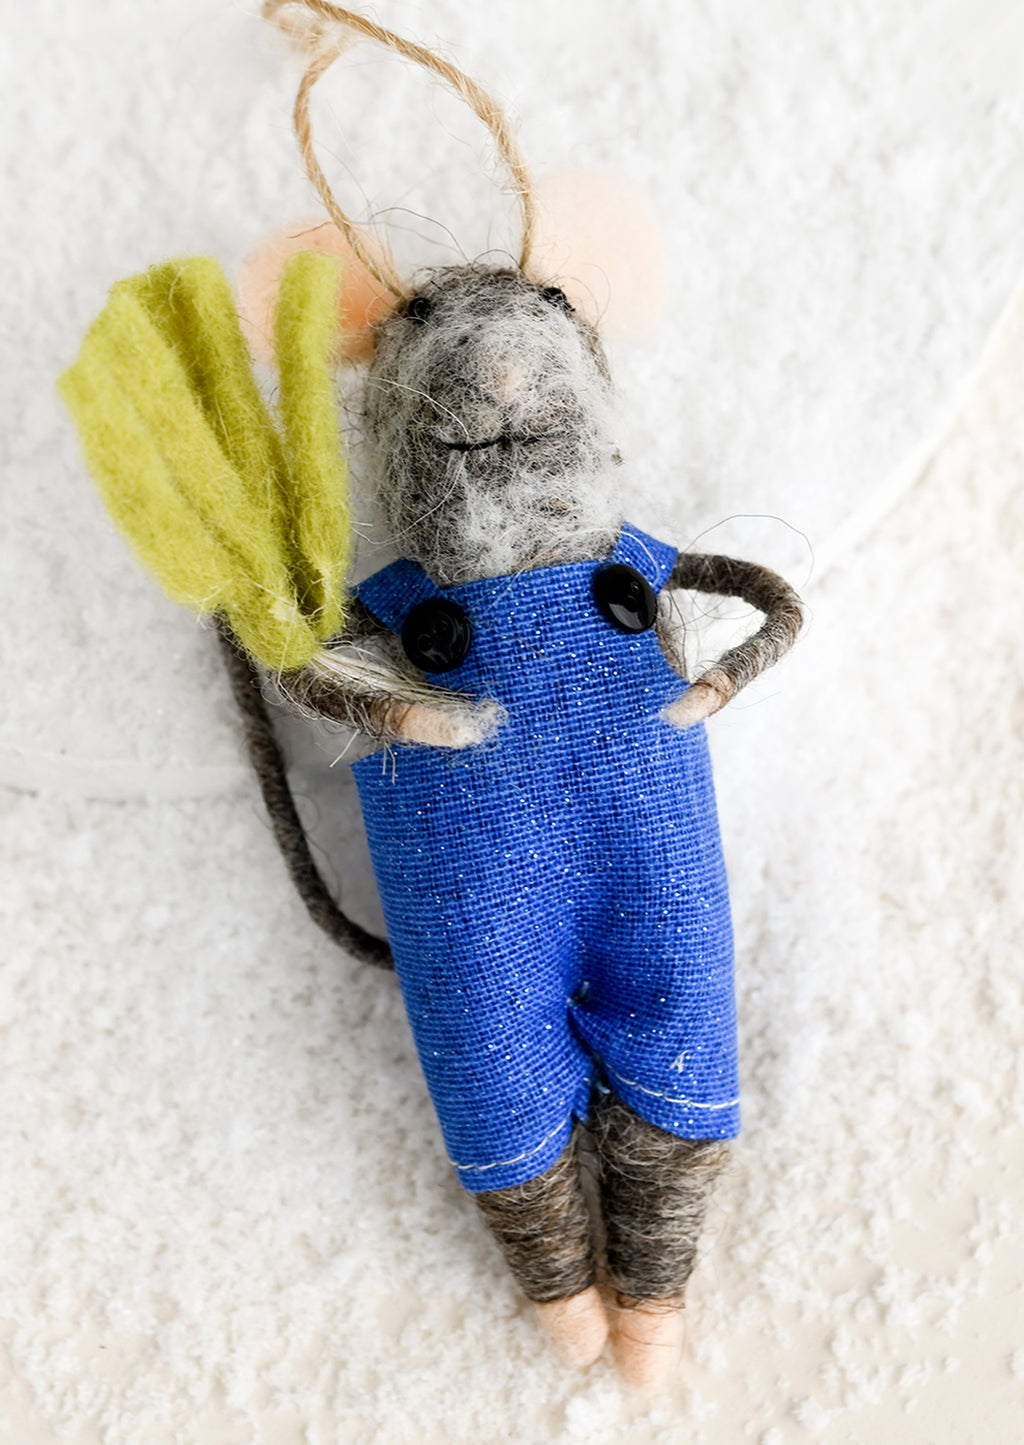 Veggie: A felted mouse ornament wearing overalls and holding a green vegetable.